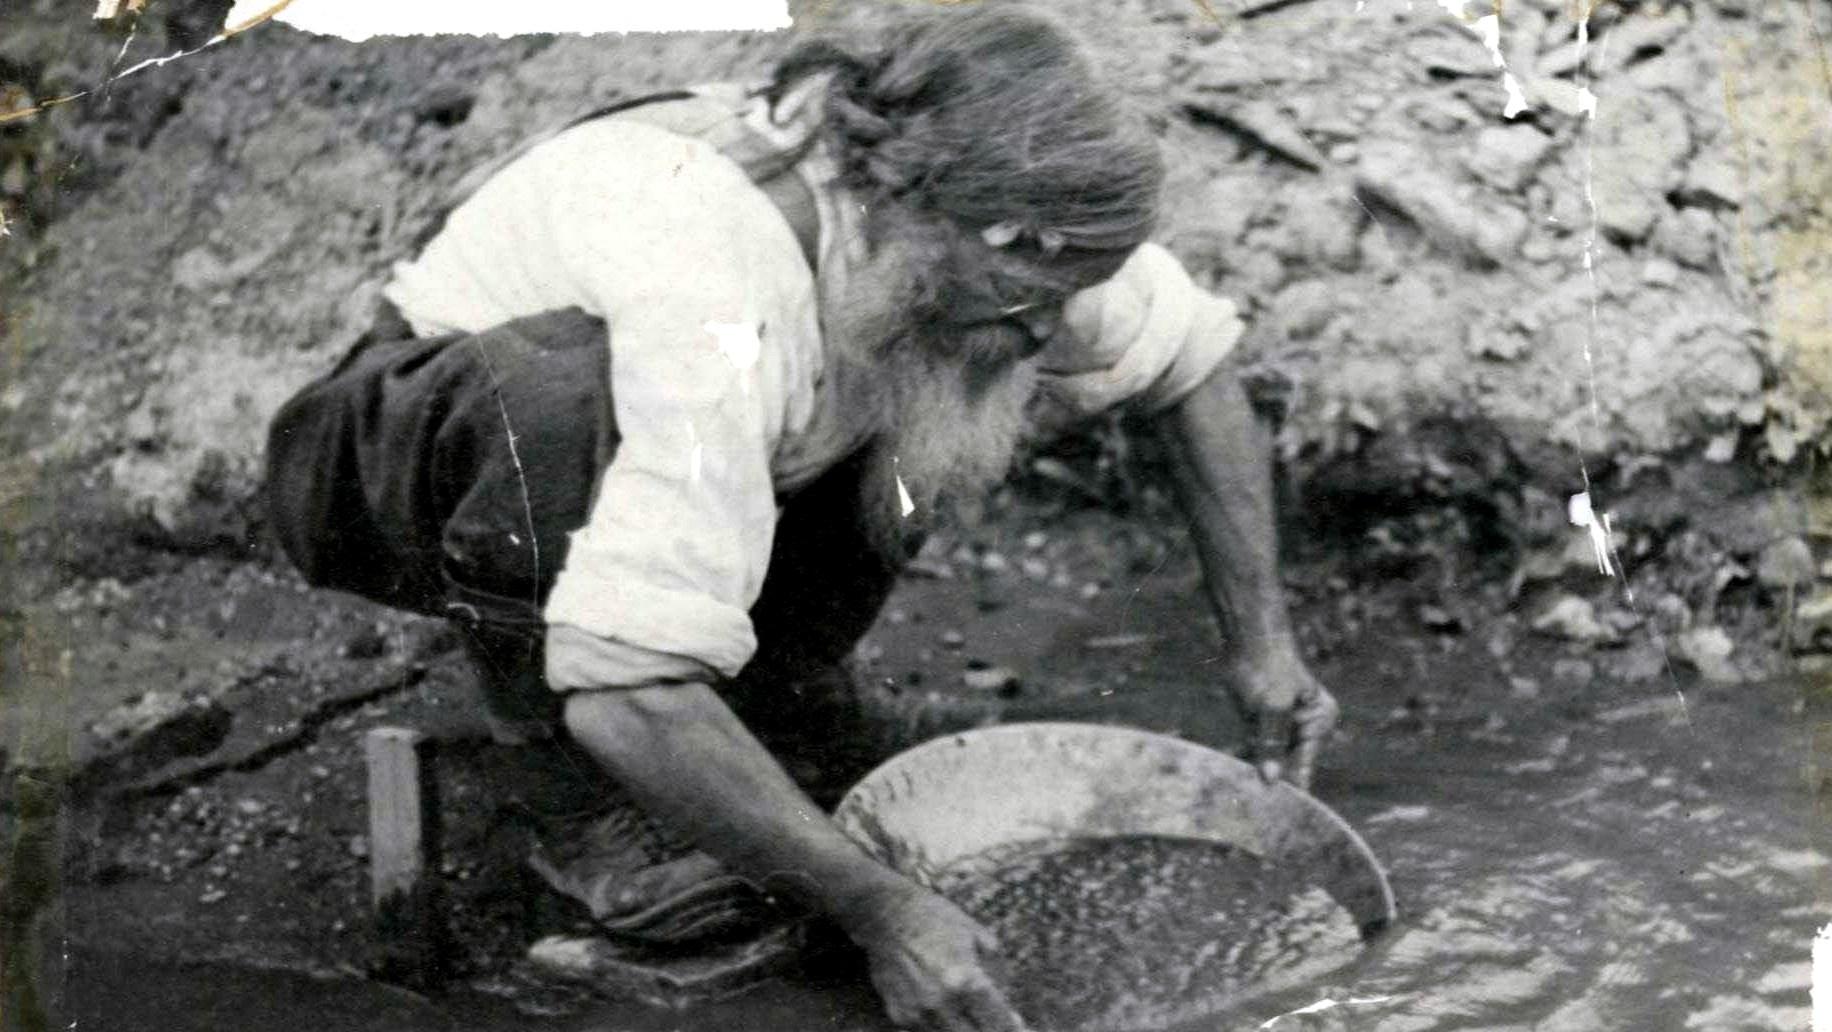 Older man with long grey beard panning for gold. 